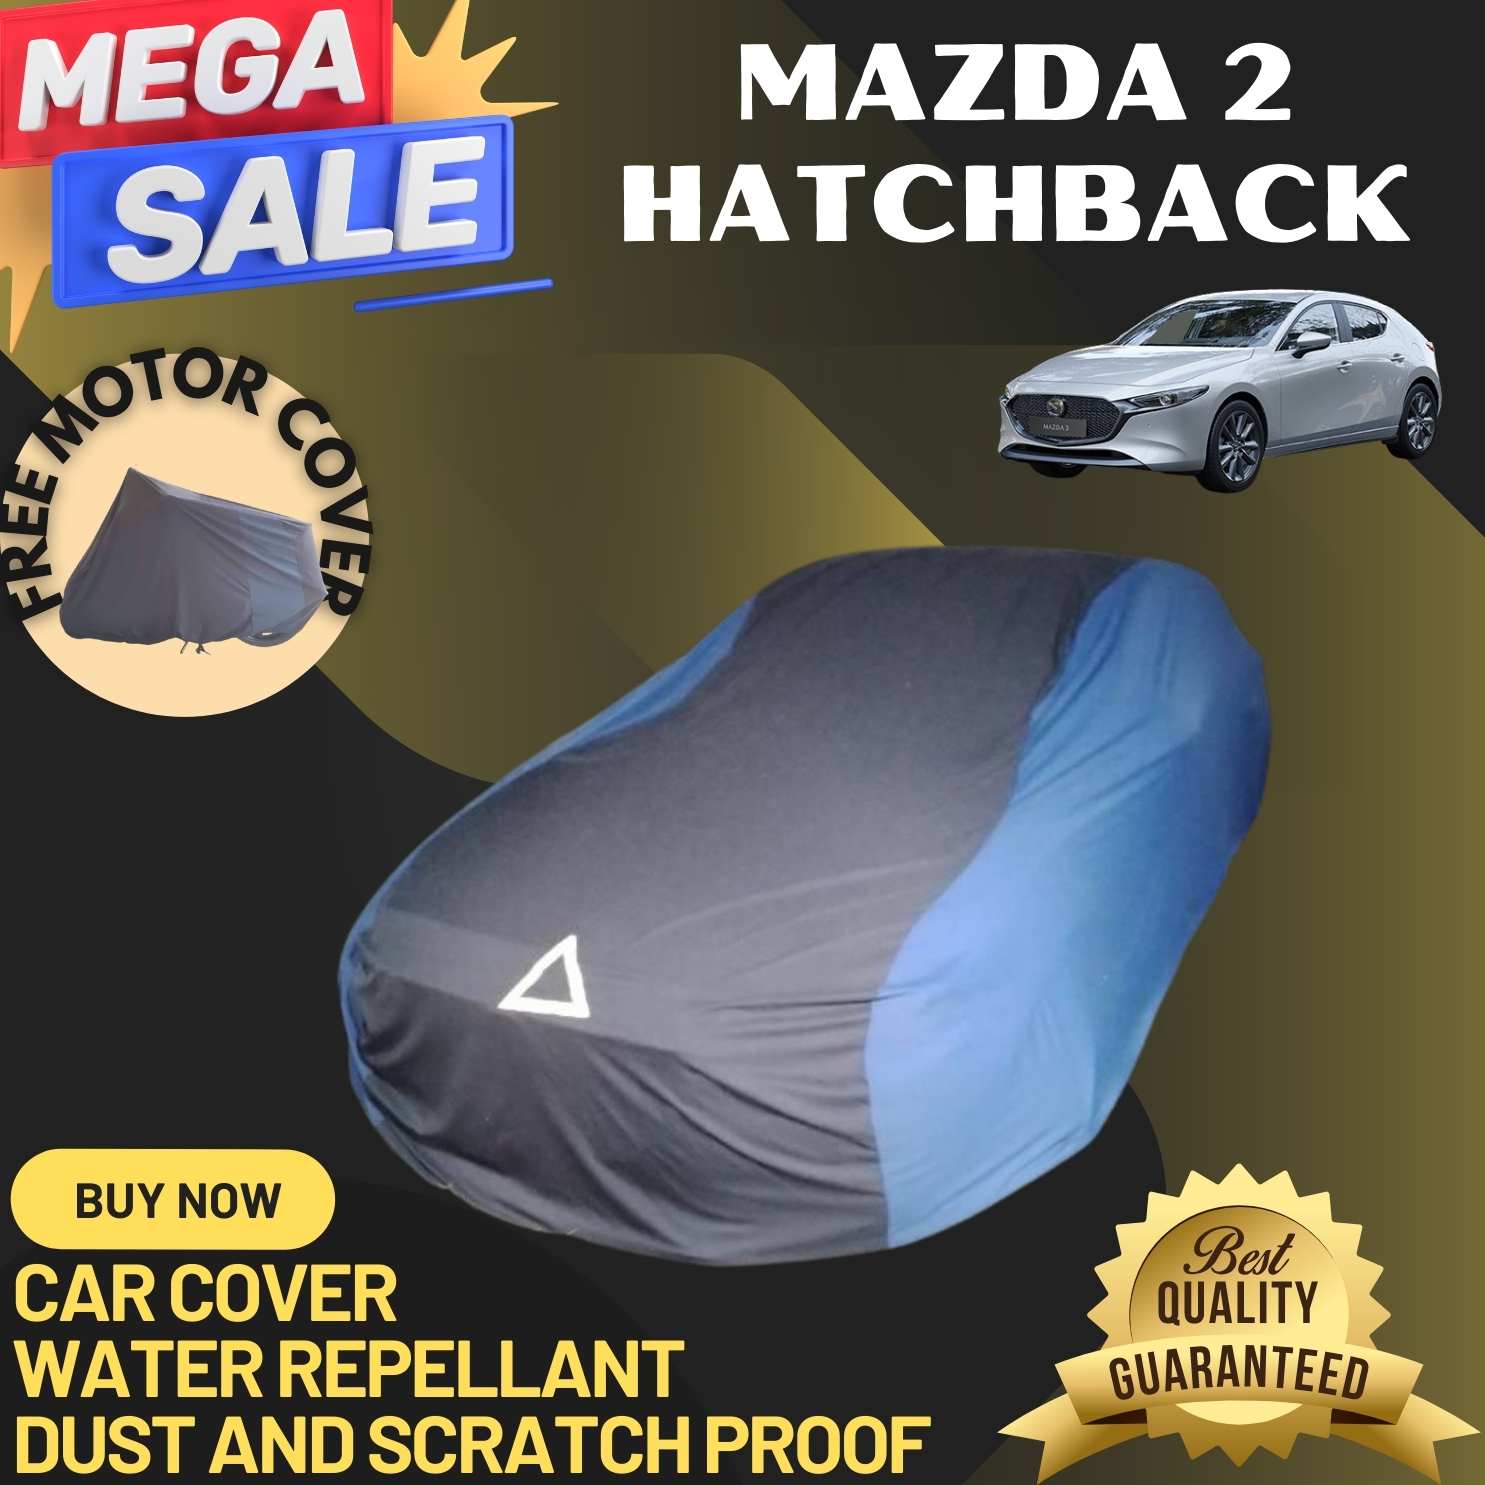 MAZDA 2 HATCHBACK HIGH QUALITY CAR COVER (WATER REPELLANT,SCRATCH